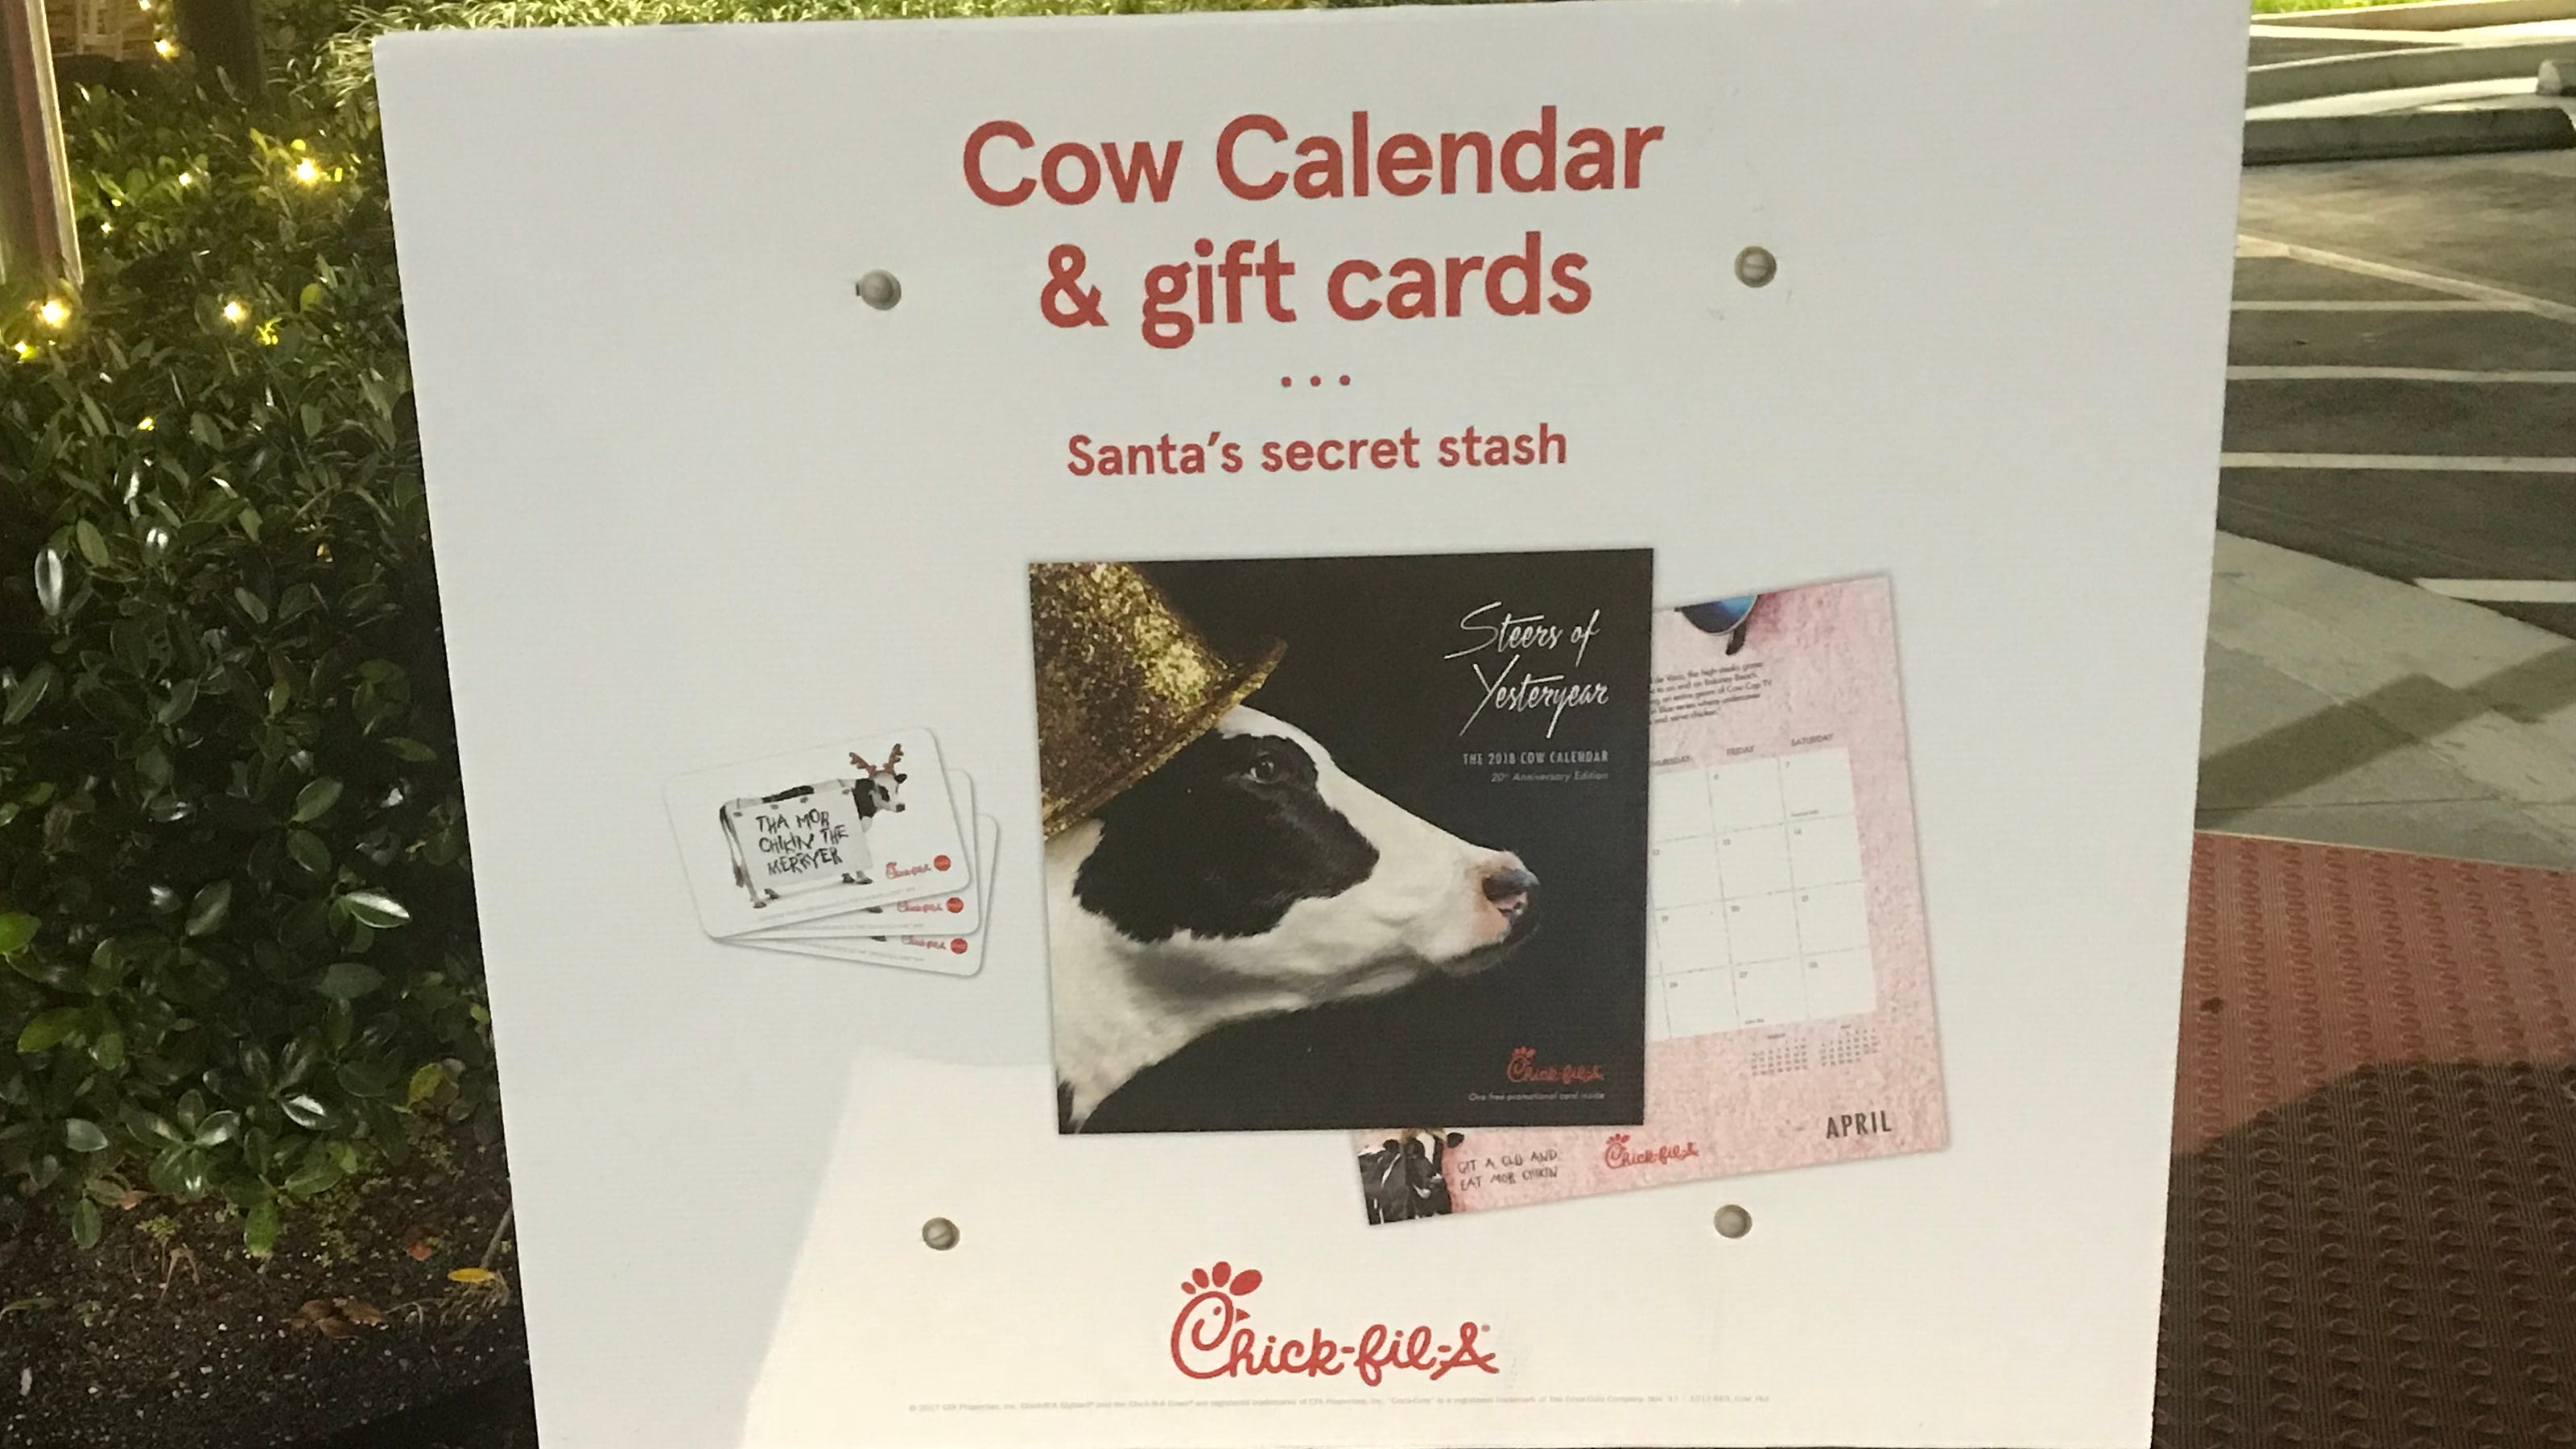 chick-fil-a-says-it-will-end-popular-cow-calendar-at-end-of-year